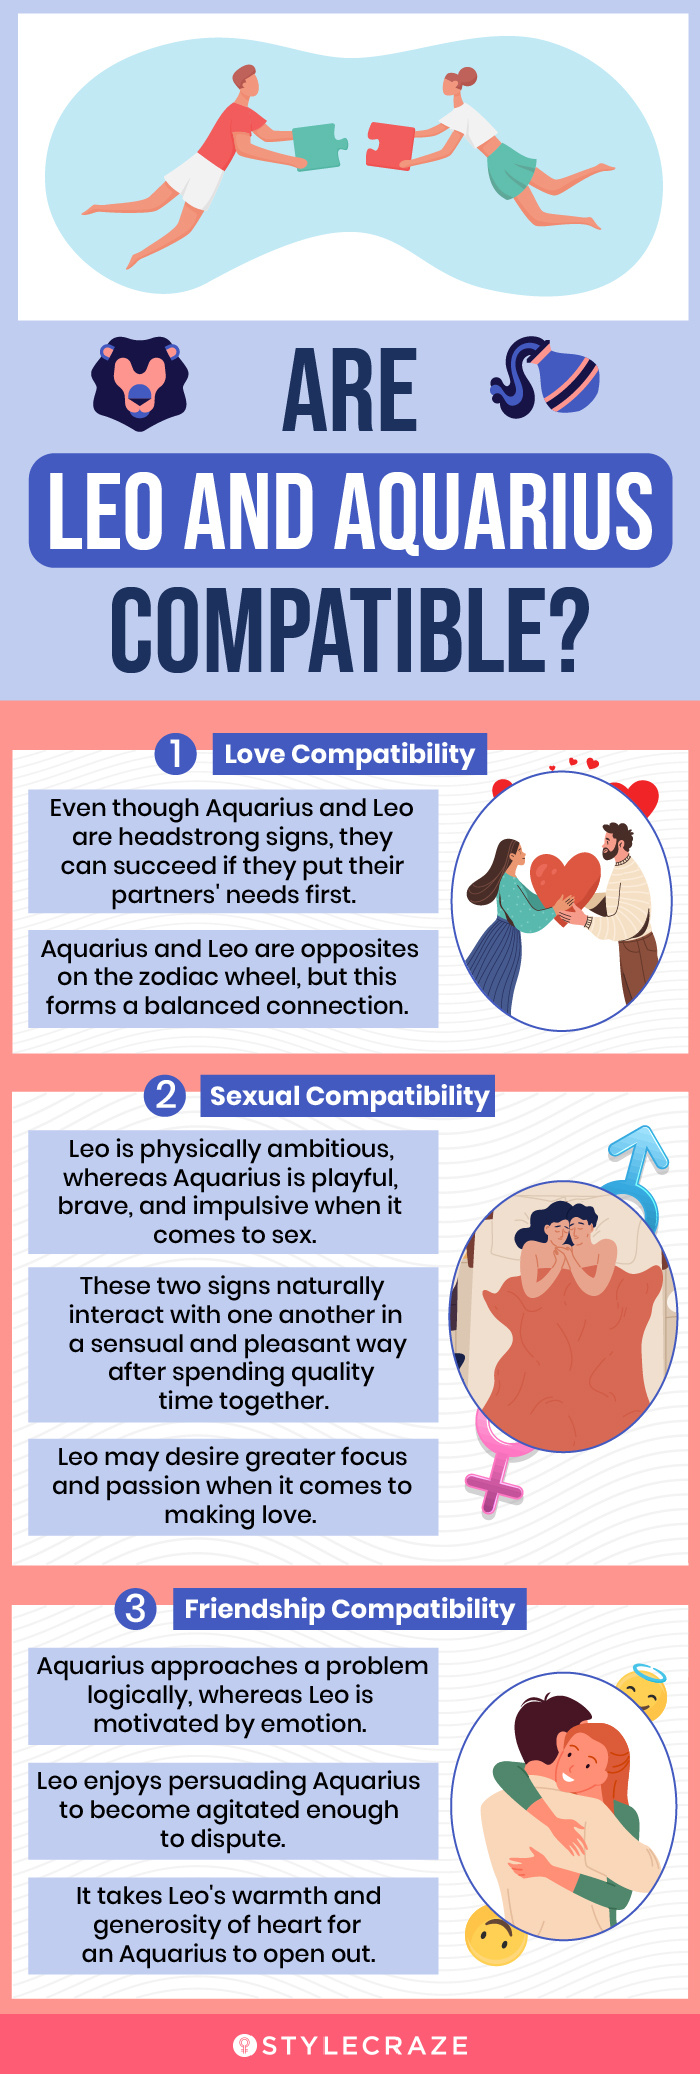 Leo And Aquarius Compatibility In Love, Sex, And Friendship